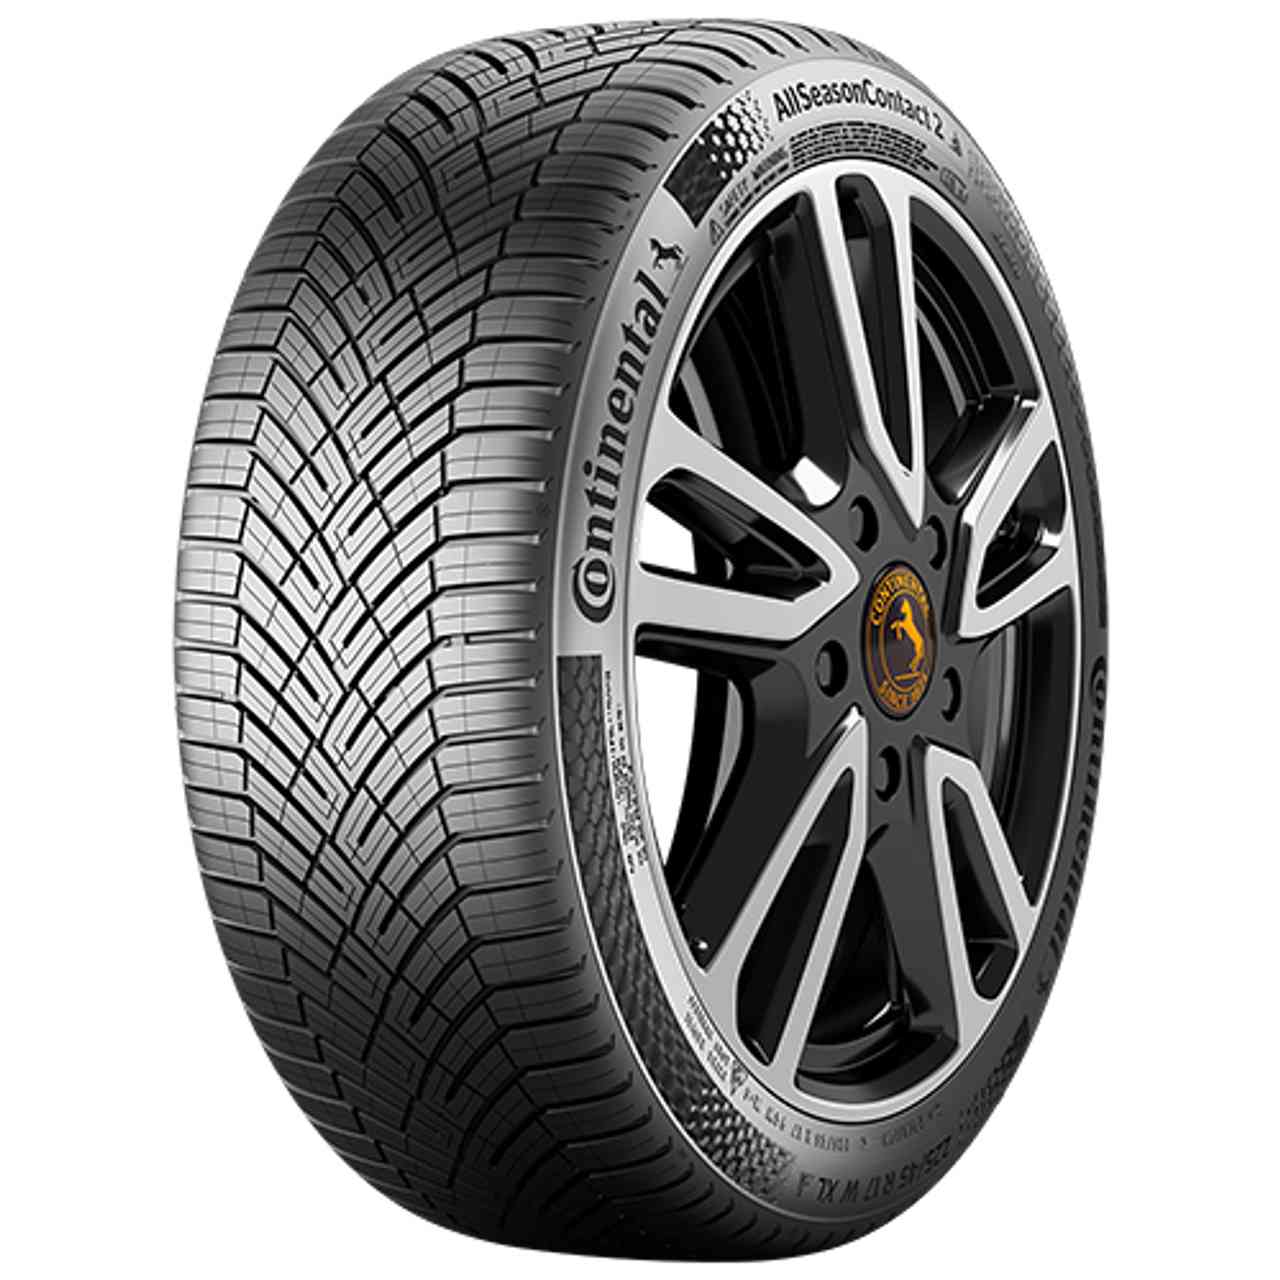 CONTINENTAL ALLSEASONCONTACT 2 (EVc) 255/60R18 112V BSW